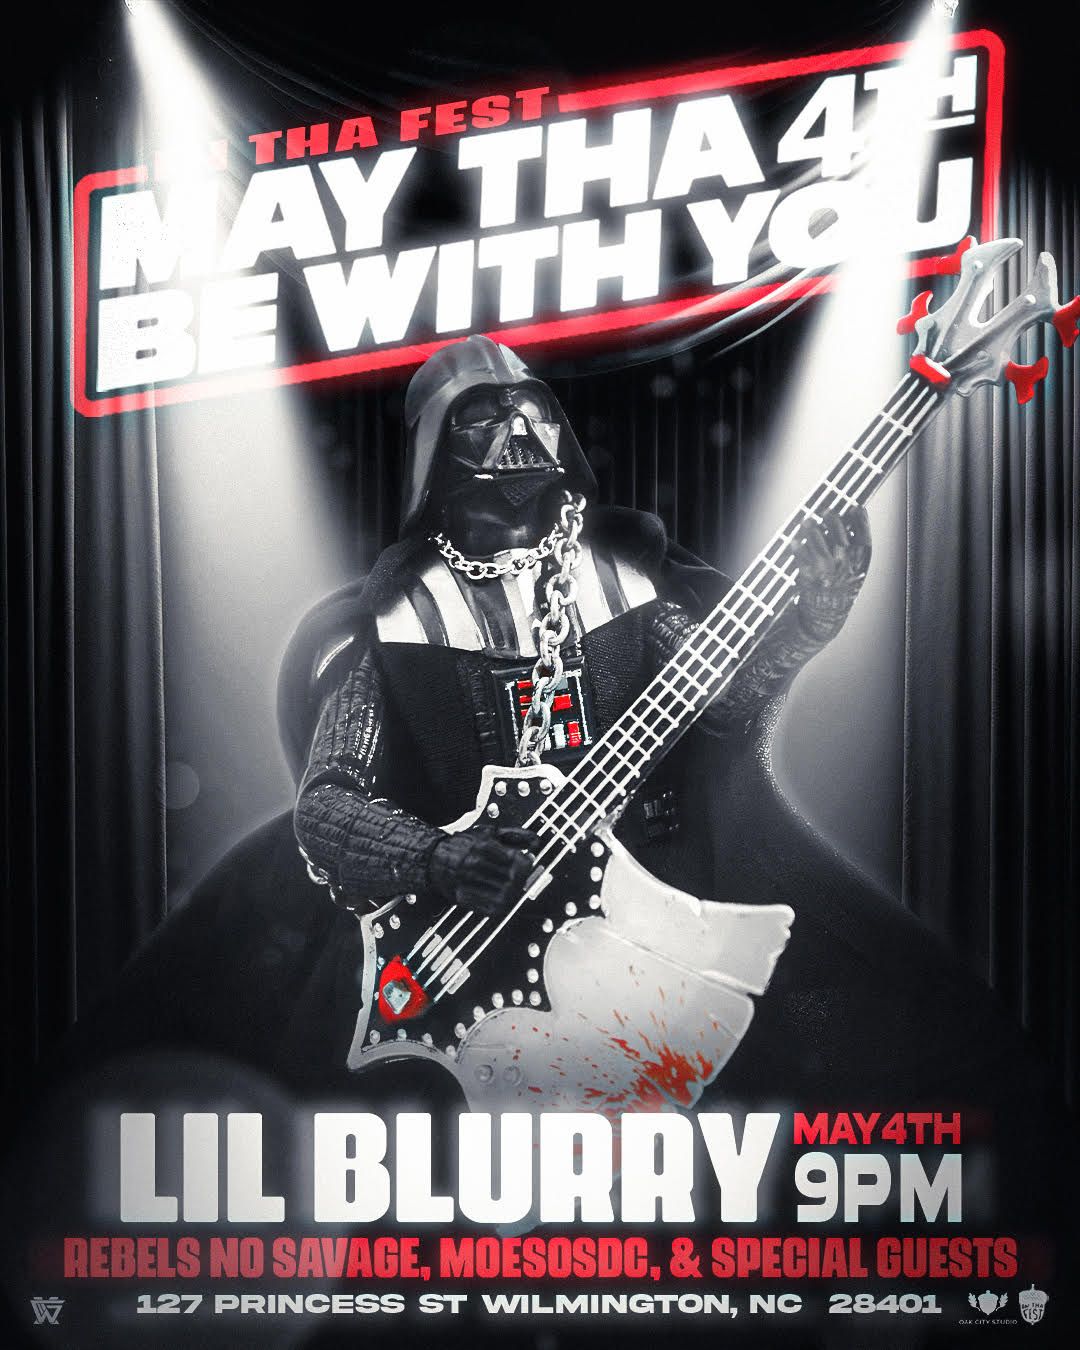 In Tha Fest presents: May Tha 4th Be With You